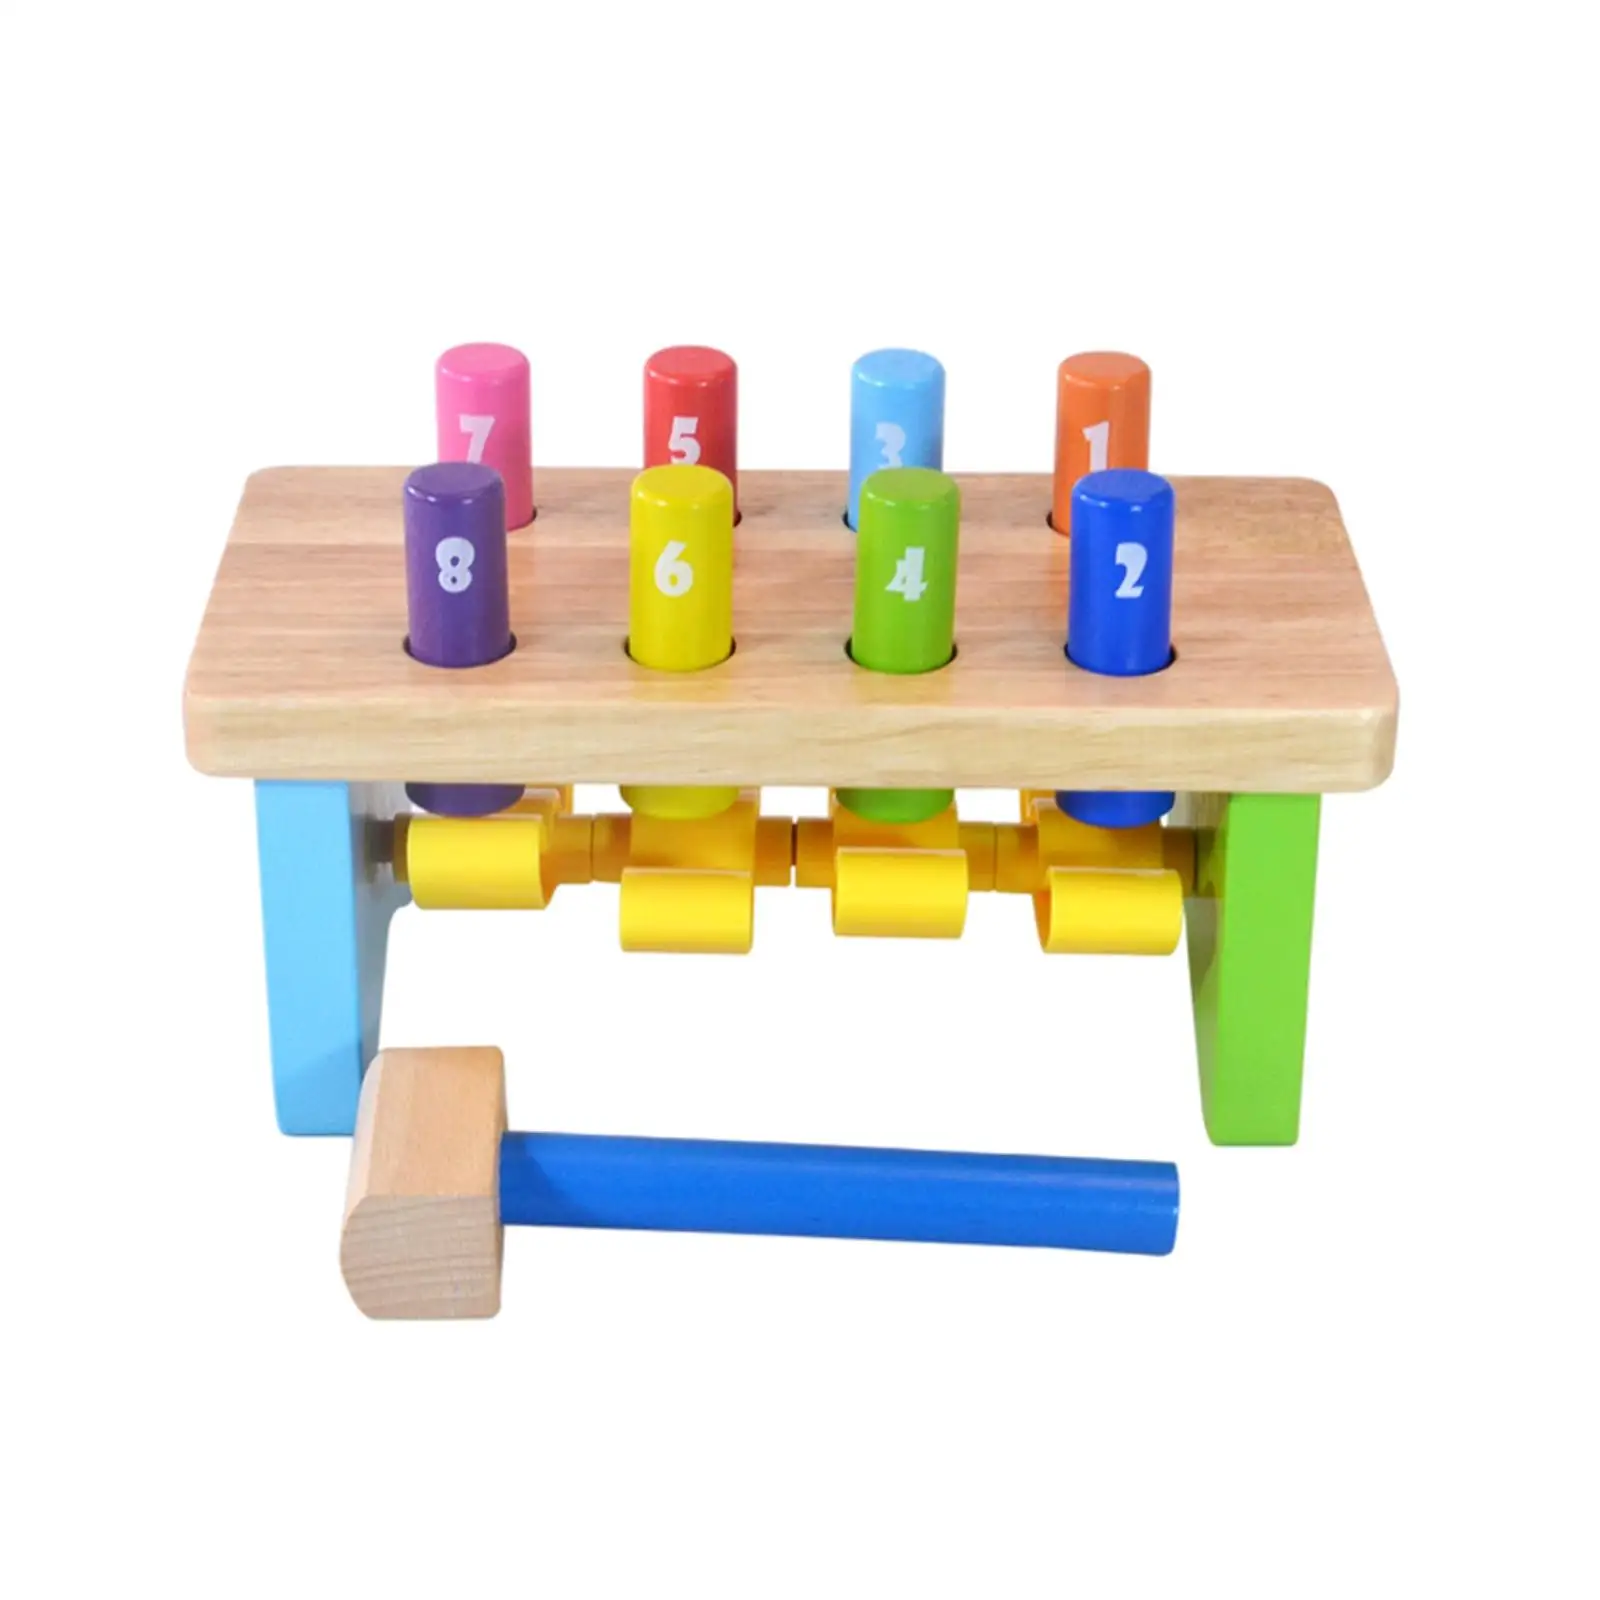 Hammer Toy - Pounding Bench Wooden Toy - Classic Hammer Toys for Toddlers and Kids 1-3 Years Old Develops Fine Motor Skills